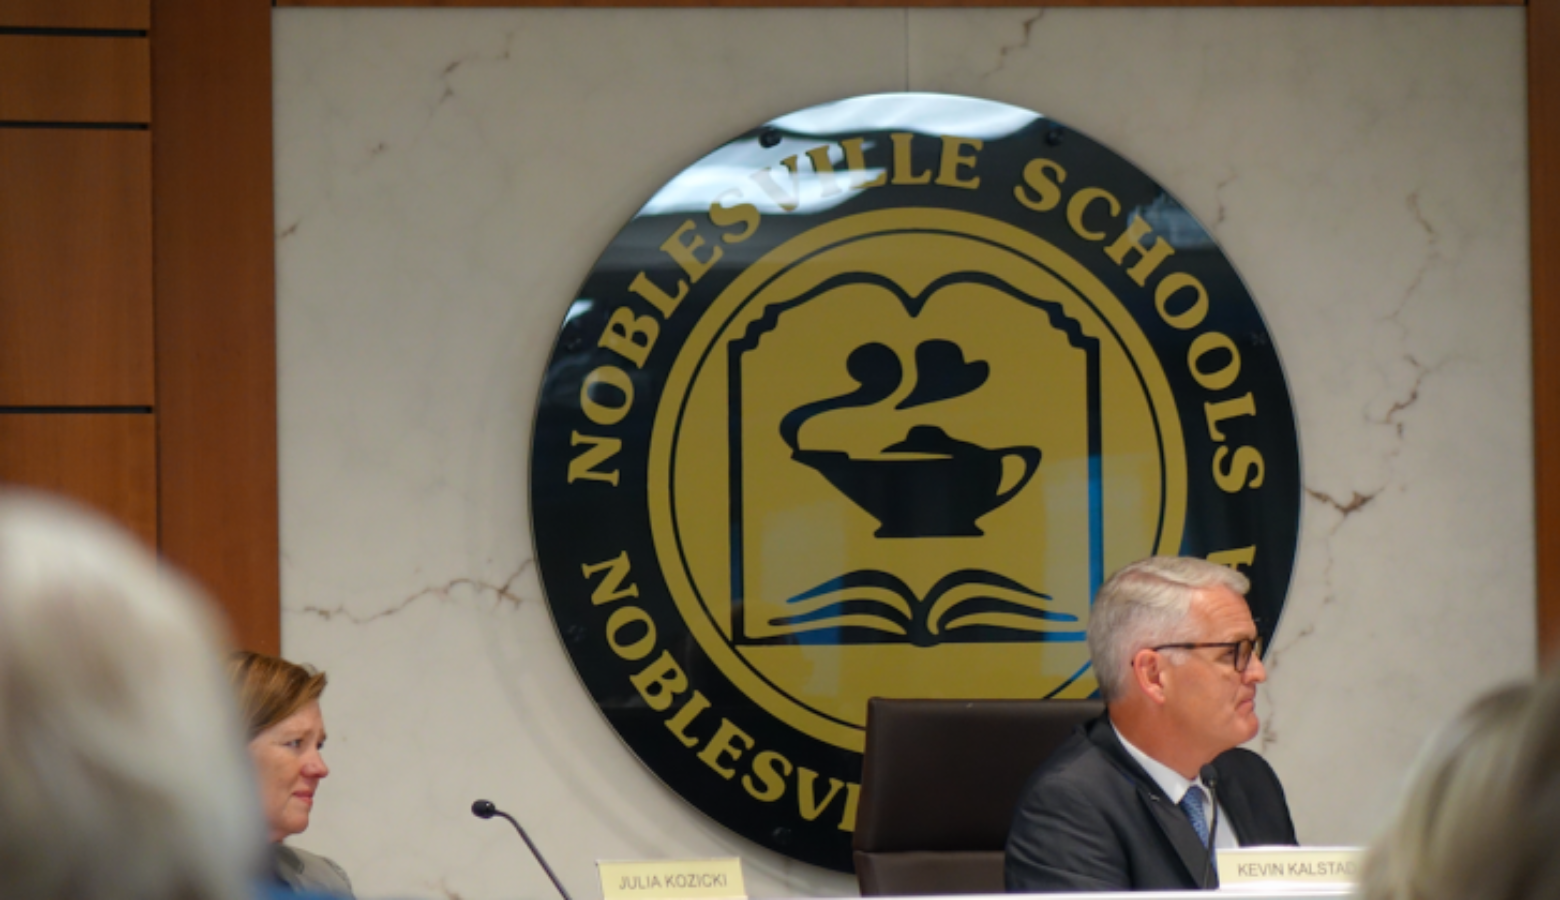 Noblesville School Board members listen as parents talk about safety concerns during a meeting on Tuesday, June 12, 2018 at the district office.